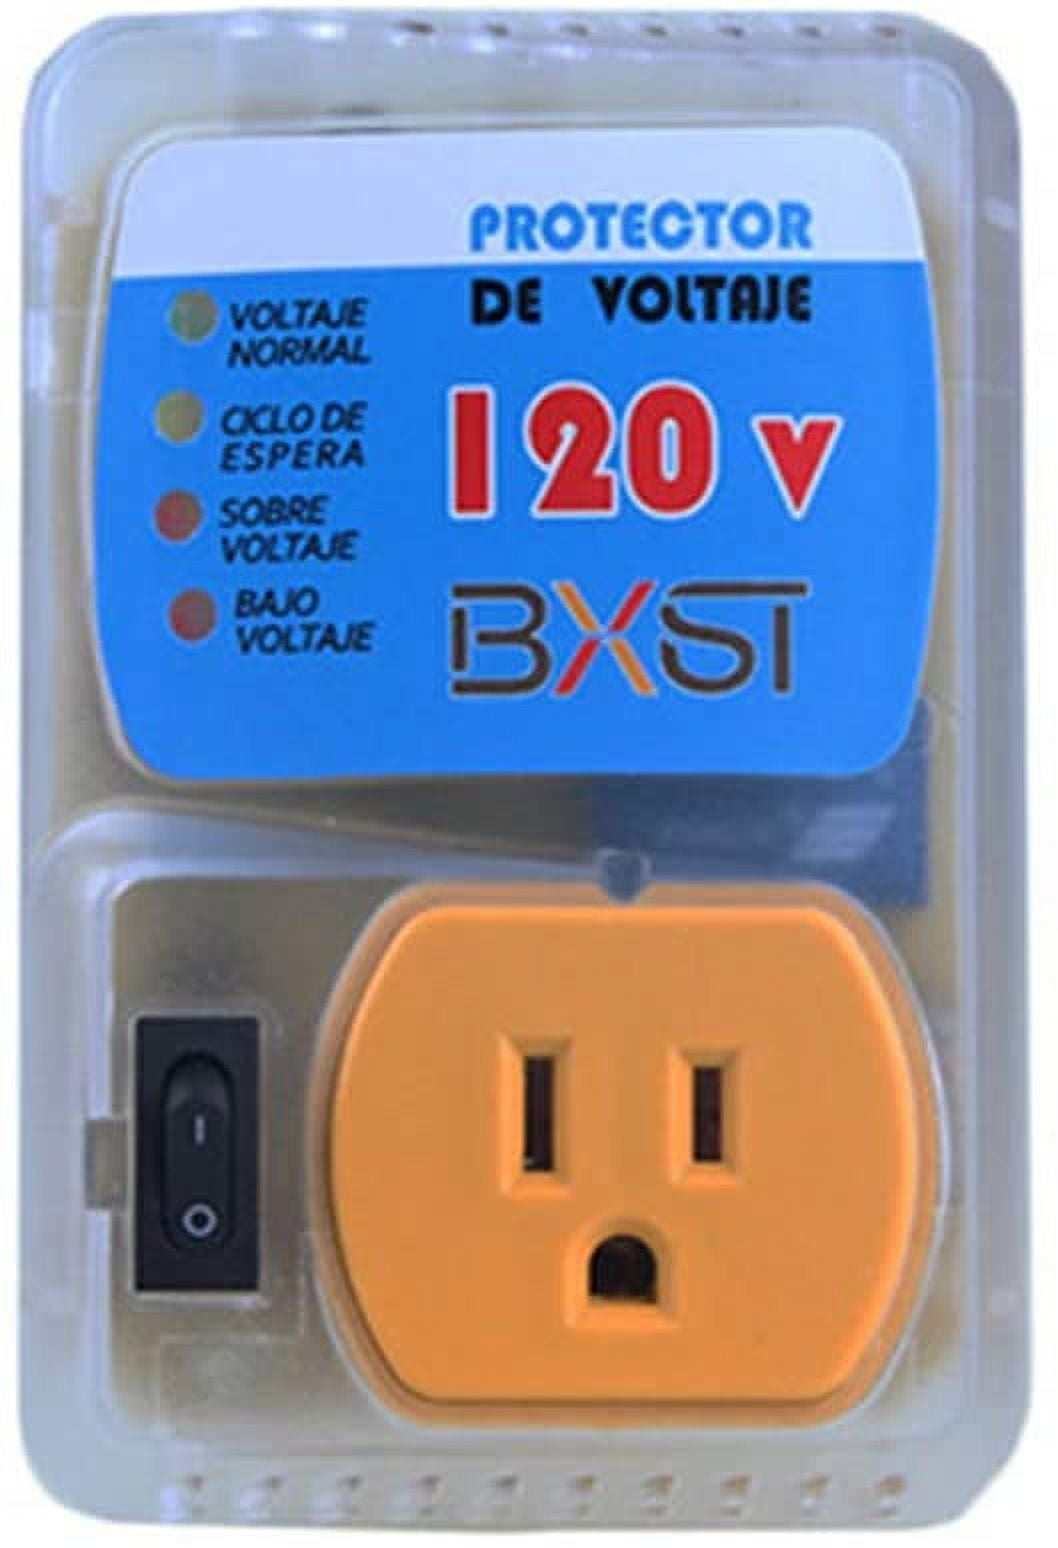 Bseed US 120V Surge Protector Voltage Brownout Plug Home Appliance PC –  Bseedswitch